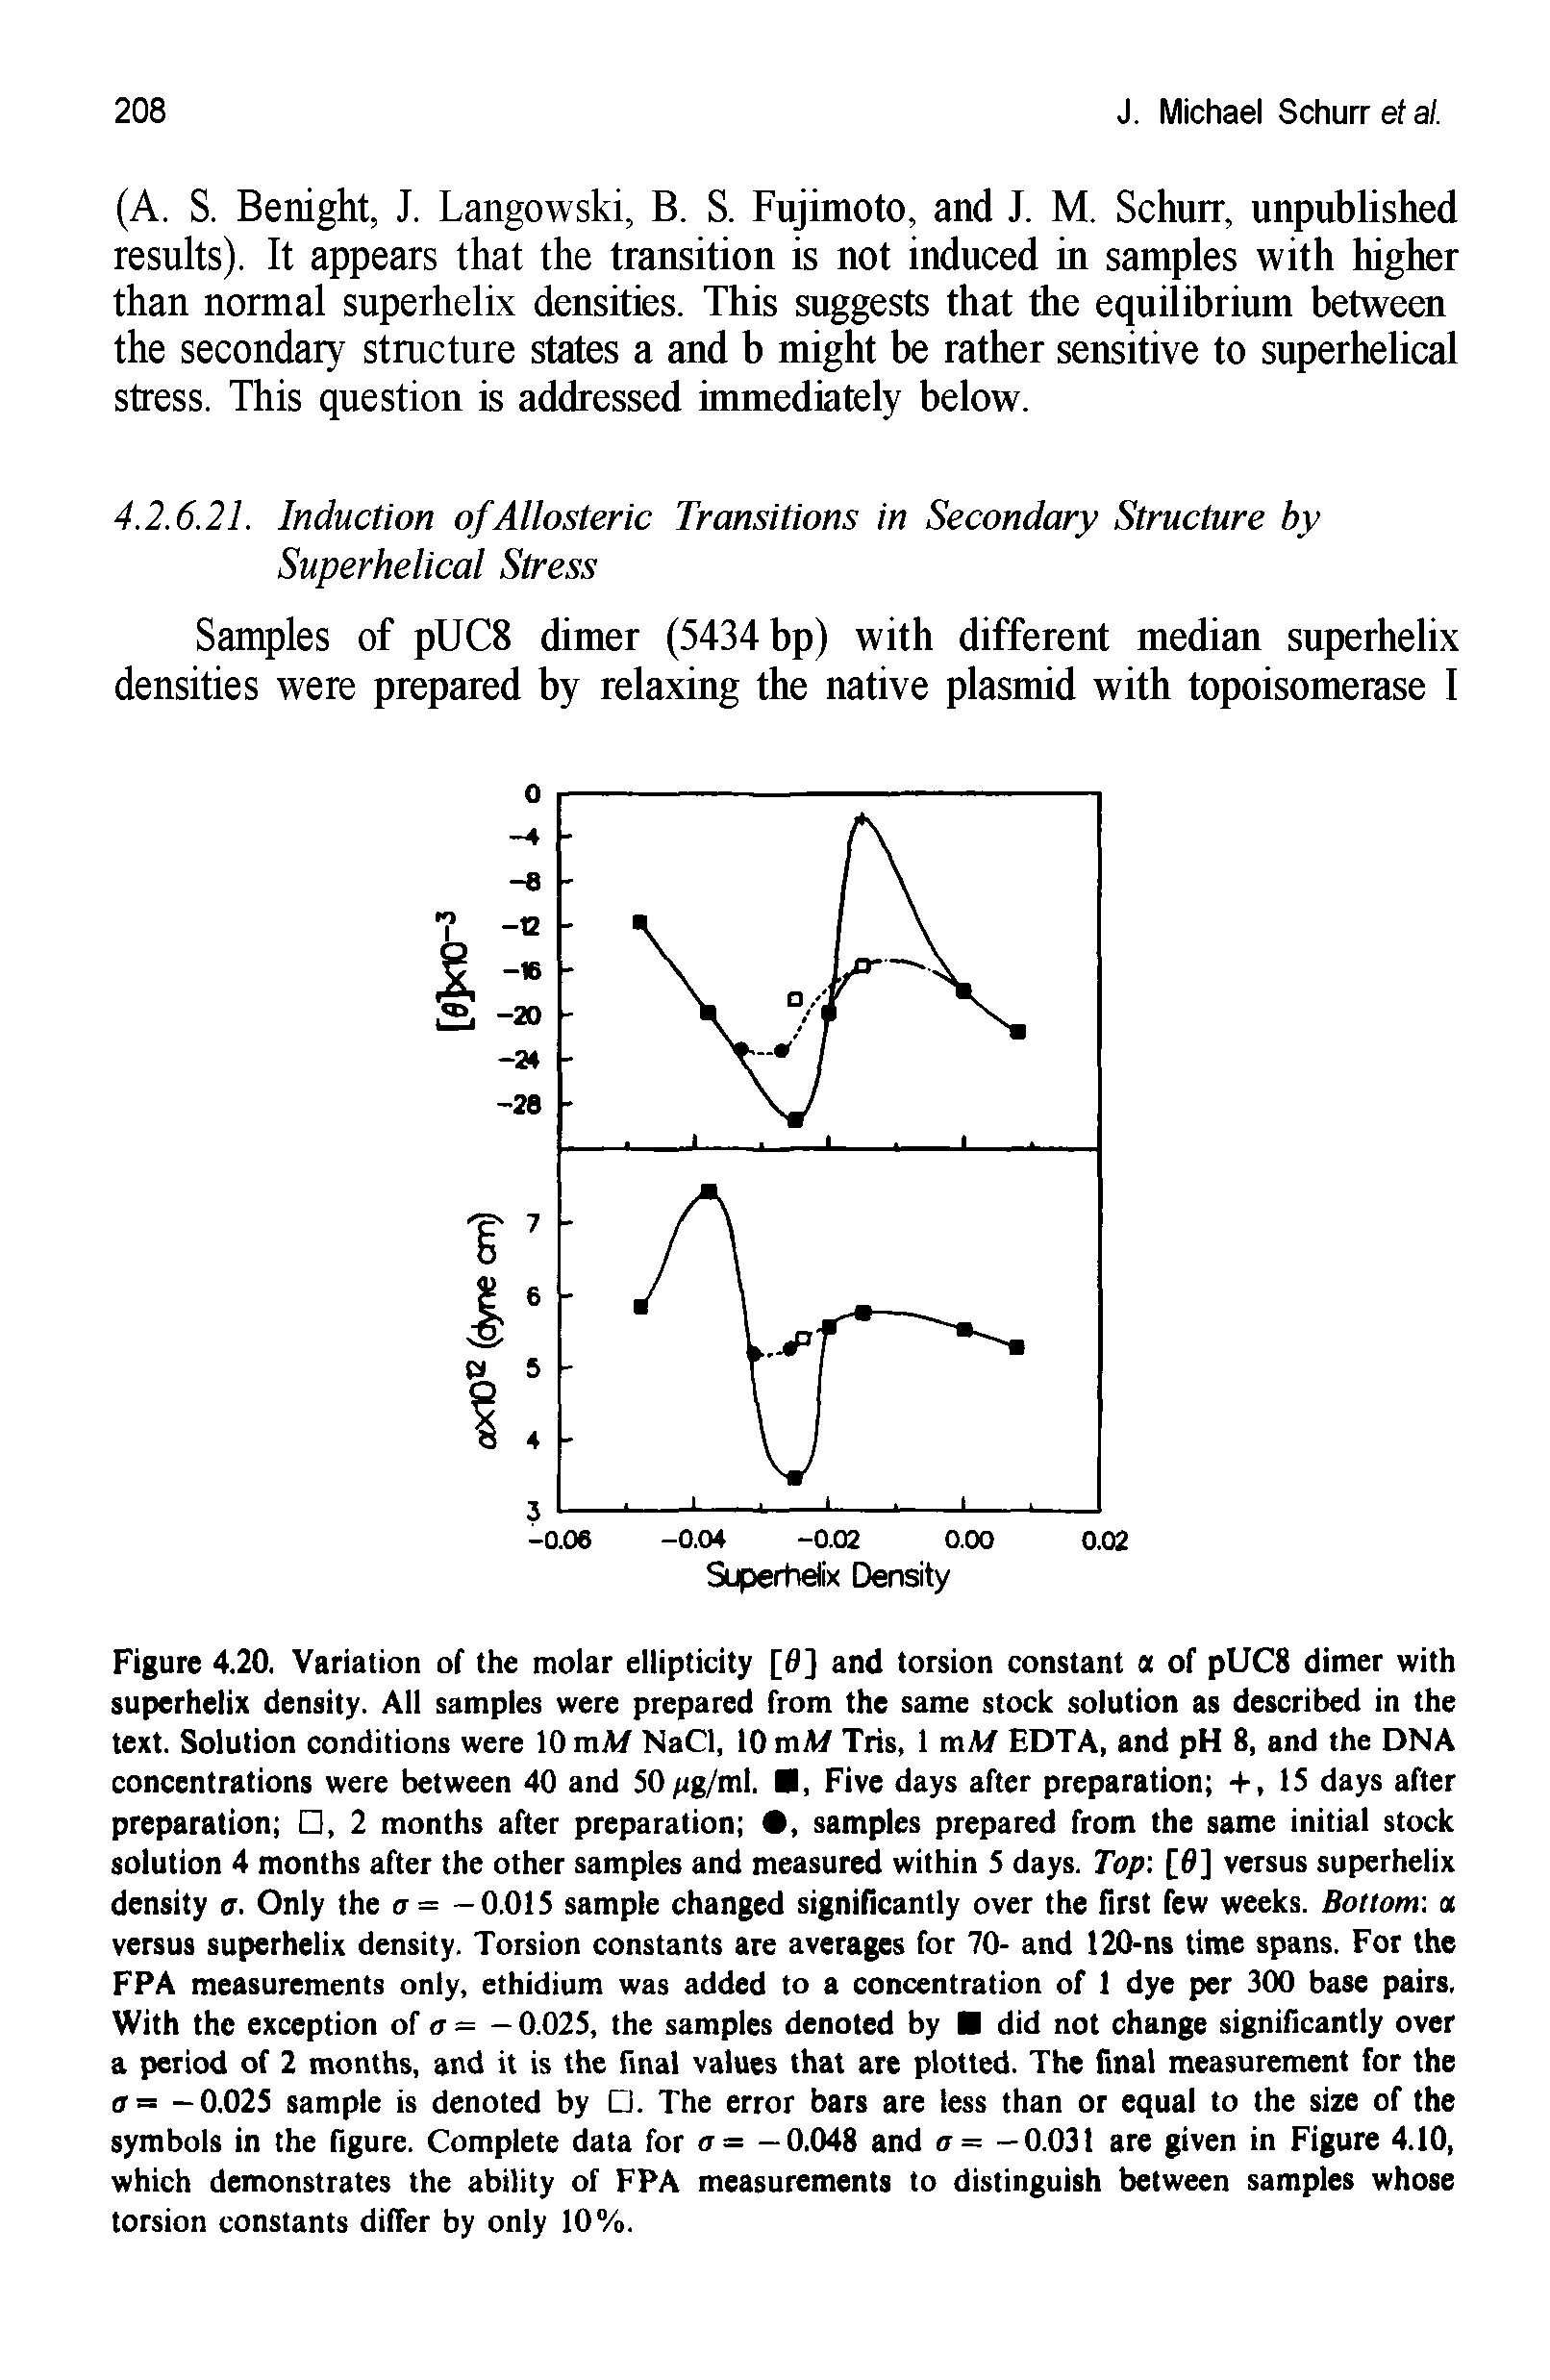 Figure 4.20. Variation of the molar ellipticity [0] and torsion constant a of pUC8 dimer with superhelix density. All samples were prepared from the same stock solution as described in the text. Solution conditions were 10 mM NaCl, 10 mM Tris, 1 mM EDTA, and pH 8, and the DNA concentrations were between 40 and 50 g/ml. , Five days after preparation +, 15 days after preparation , 2 months after preparation , samples prepared from the same initial stock solution 4 months after the other samples and measured within 5 days. Top [0] versus superhelix density a. Only the a = -0.015 sample changed significantly over the first few weeks. Bottom a versus superhelix density. Torsion constants are averages for 70- and 120-ns time spans. For the FPA measurements only, ethidium was added to a concentration of 1 dye per 300 base pairs. With the exception of a - - 0.025, the samples denoted by did not change significantly over a period of 2 months, and it is the final values that are plotted. The final measurement for the a= -0.025 sample is denoted by . The error bars are less than or equal to the size of the symbols in the figure. Complete data for o= —0.048 and o= —0.031 are given in Figure 4.10, which demonstrates the ability of FPA measurements to distinguish between samples whose torsion constants differ by only 10%.